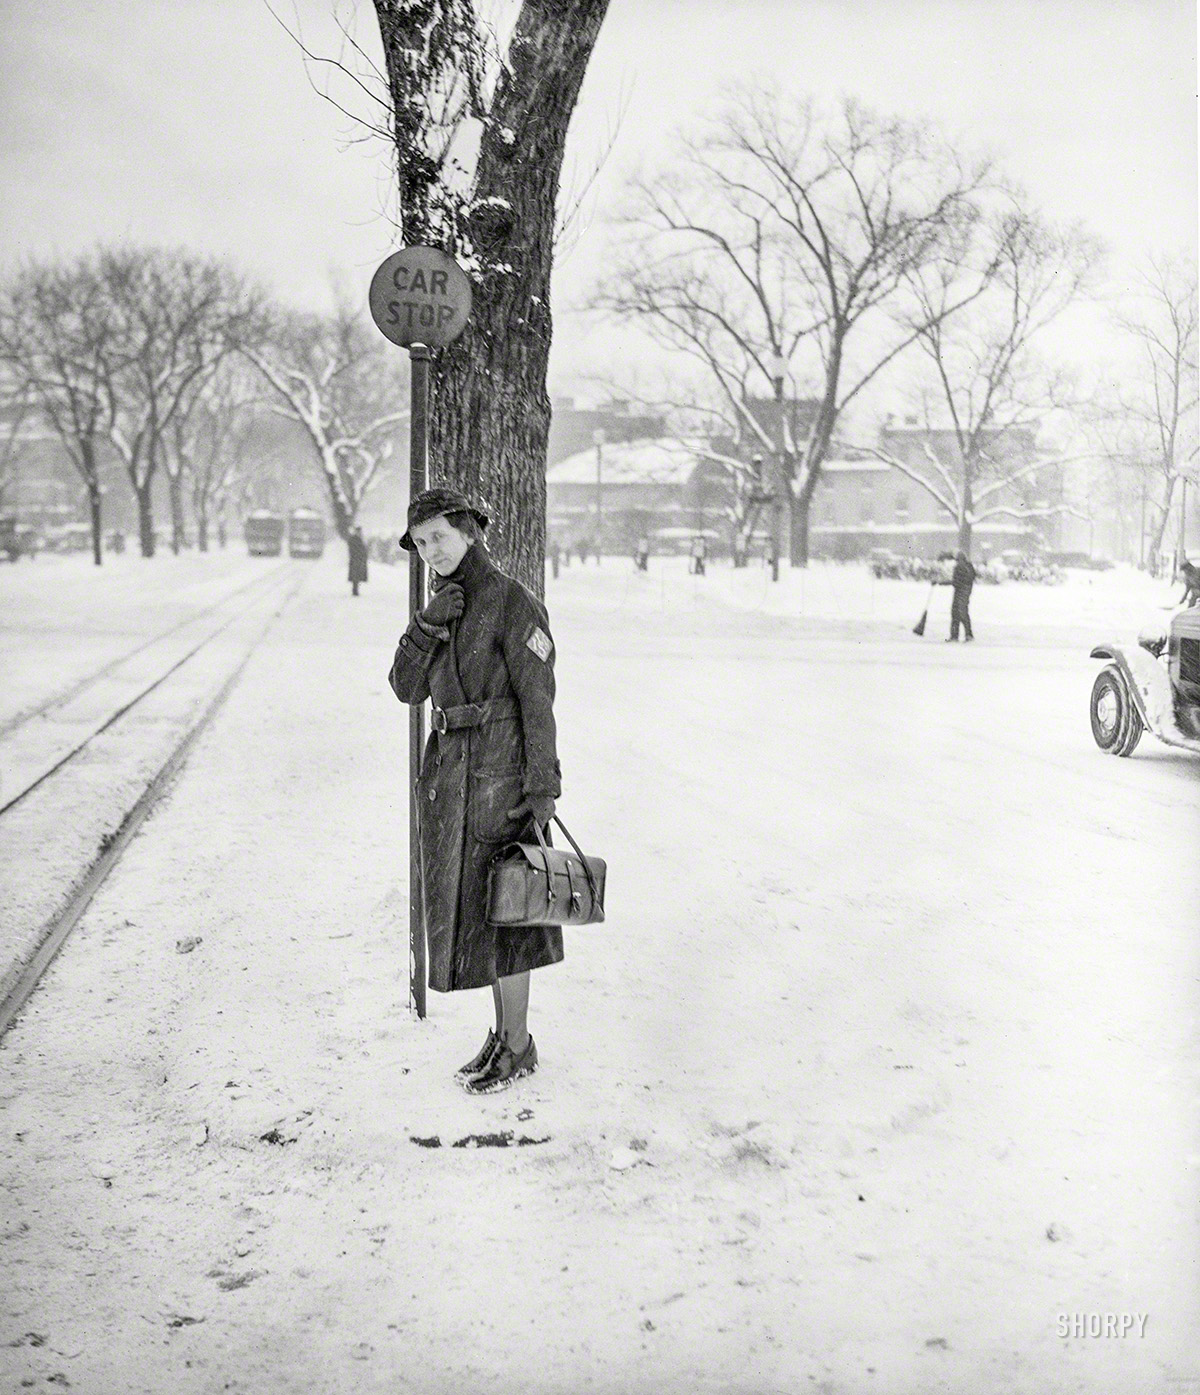 February 1936. Washington, D.C. "Woman in snow." One capital commuter who seems unfazed by the white stuff. Harris & Ewing glass negative. View full size.